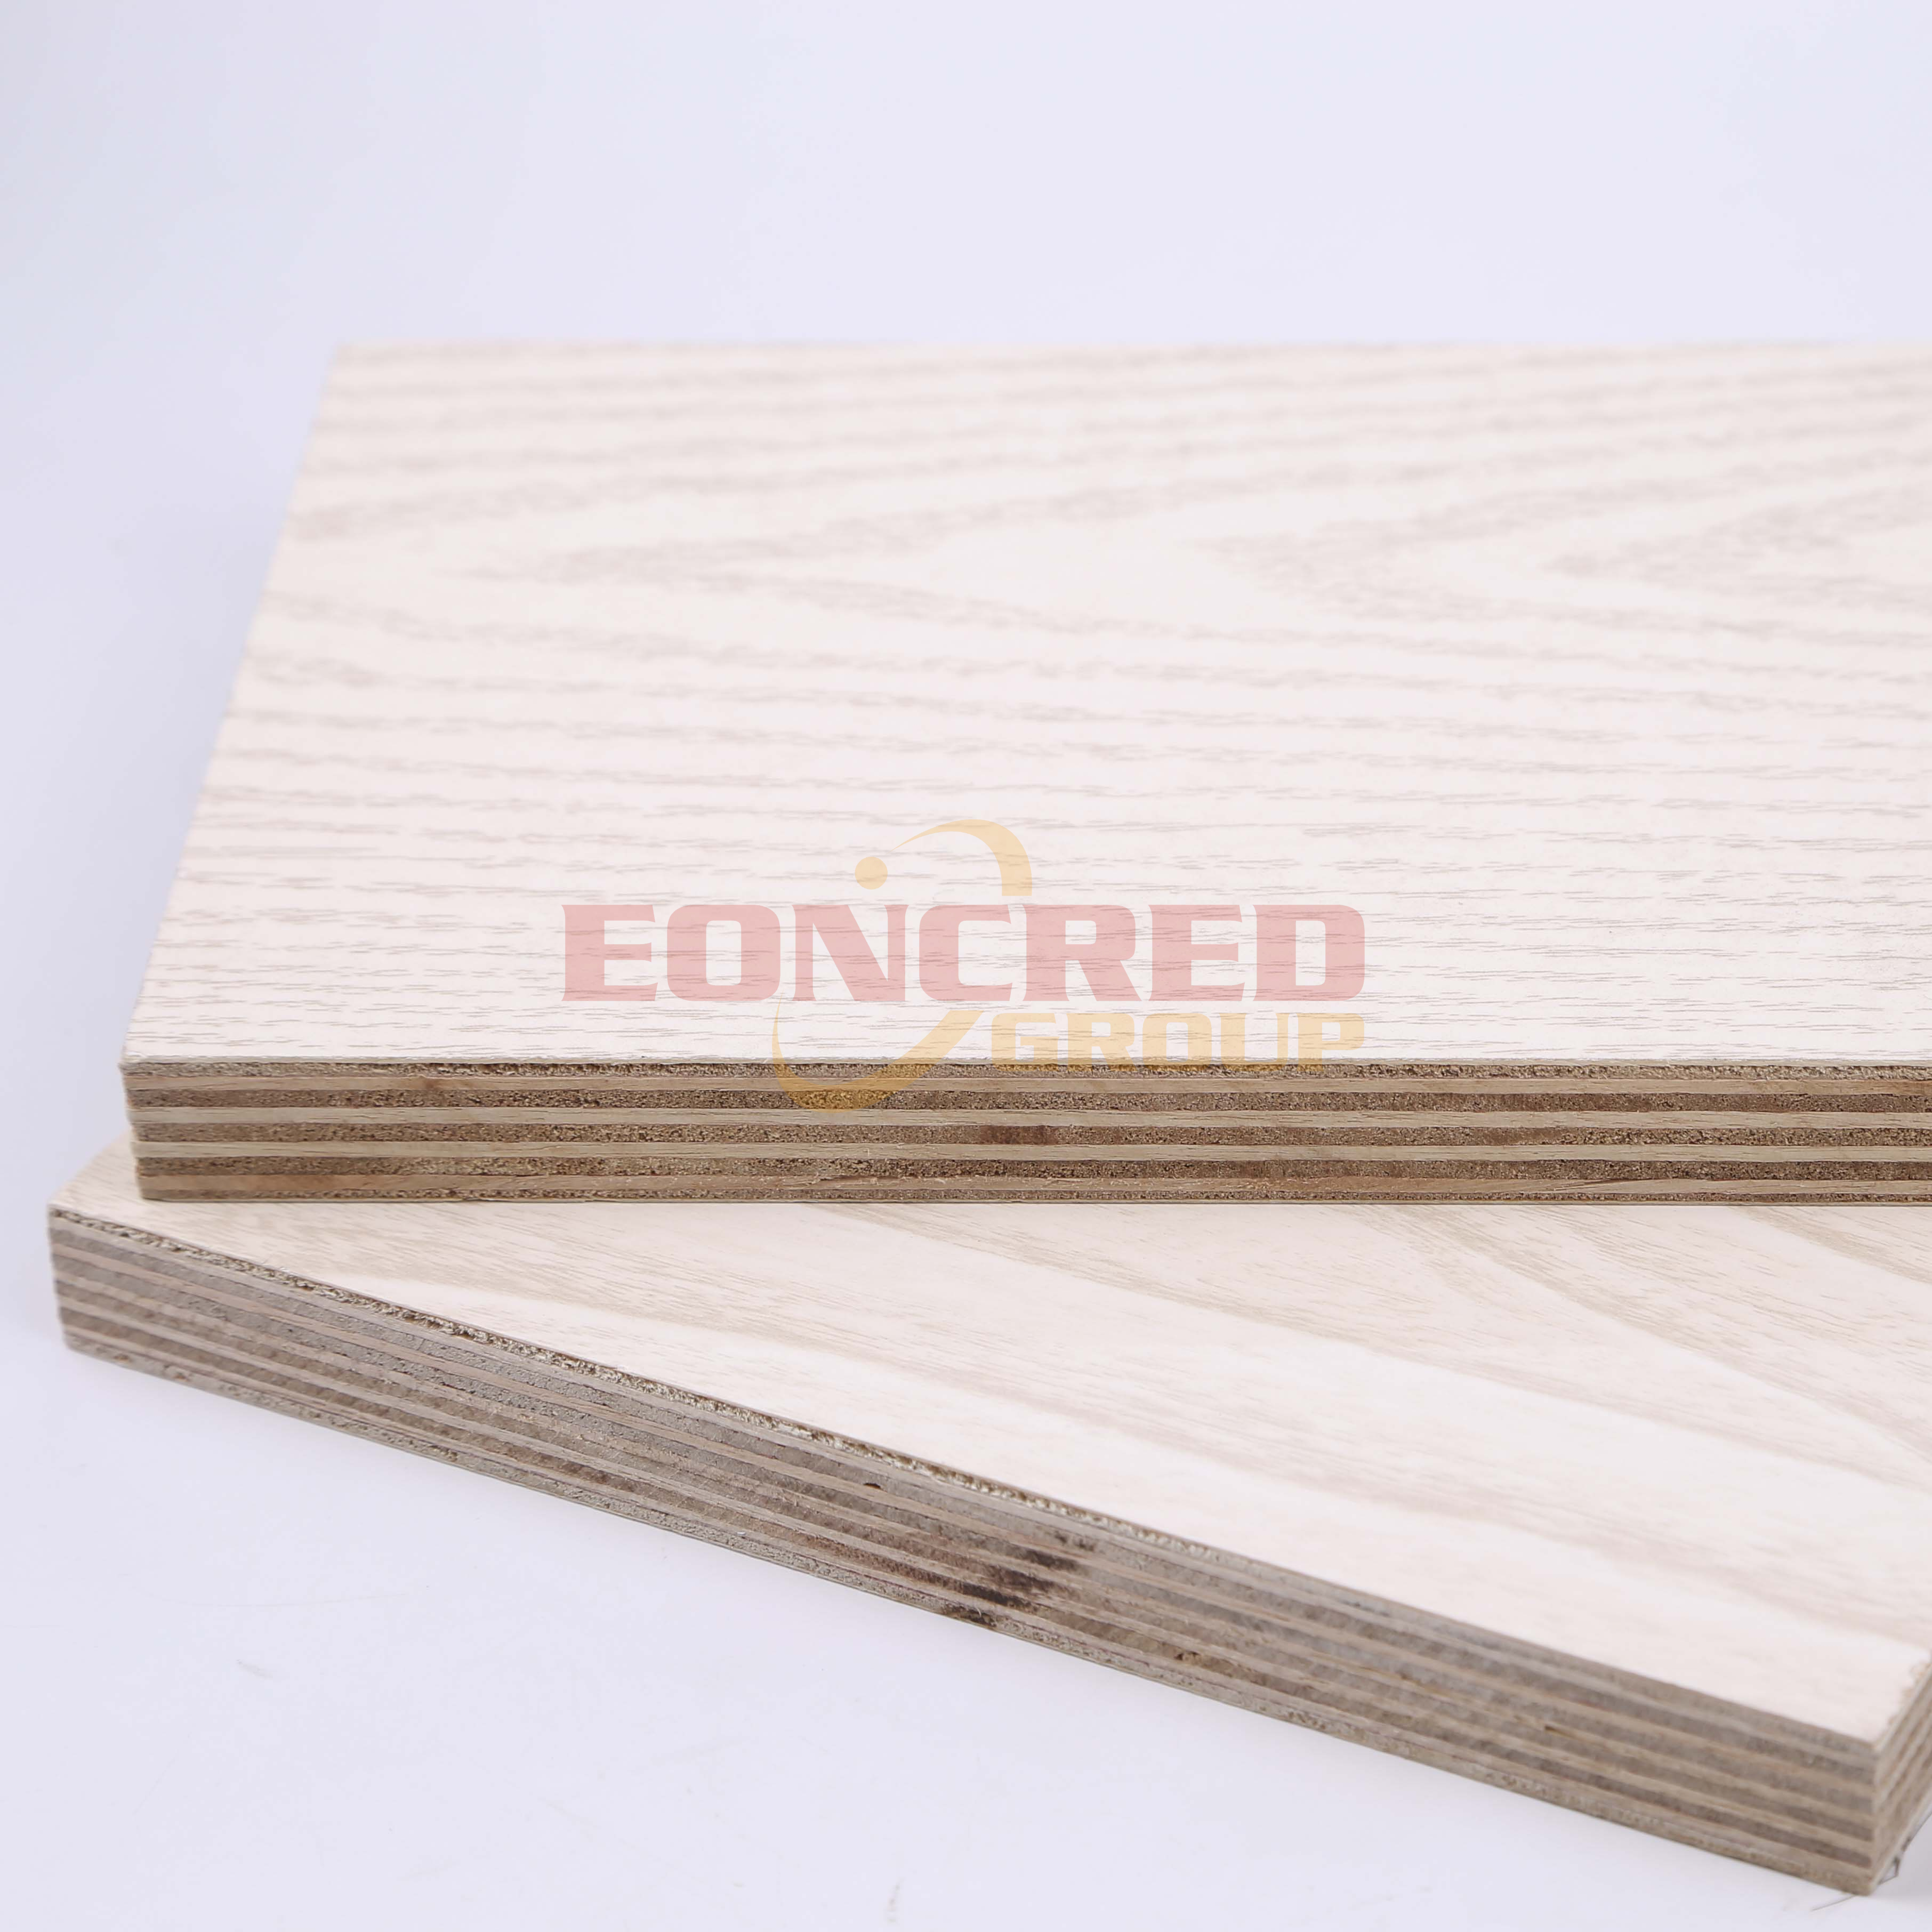 historie Flyselskaber Tangle Full Poplar Core Wood Laminated Plywood Melamine Paper from China  manufacturer - Eoncred Group